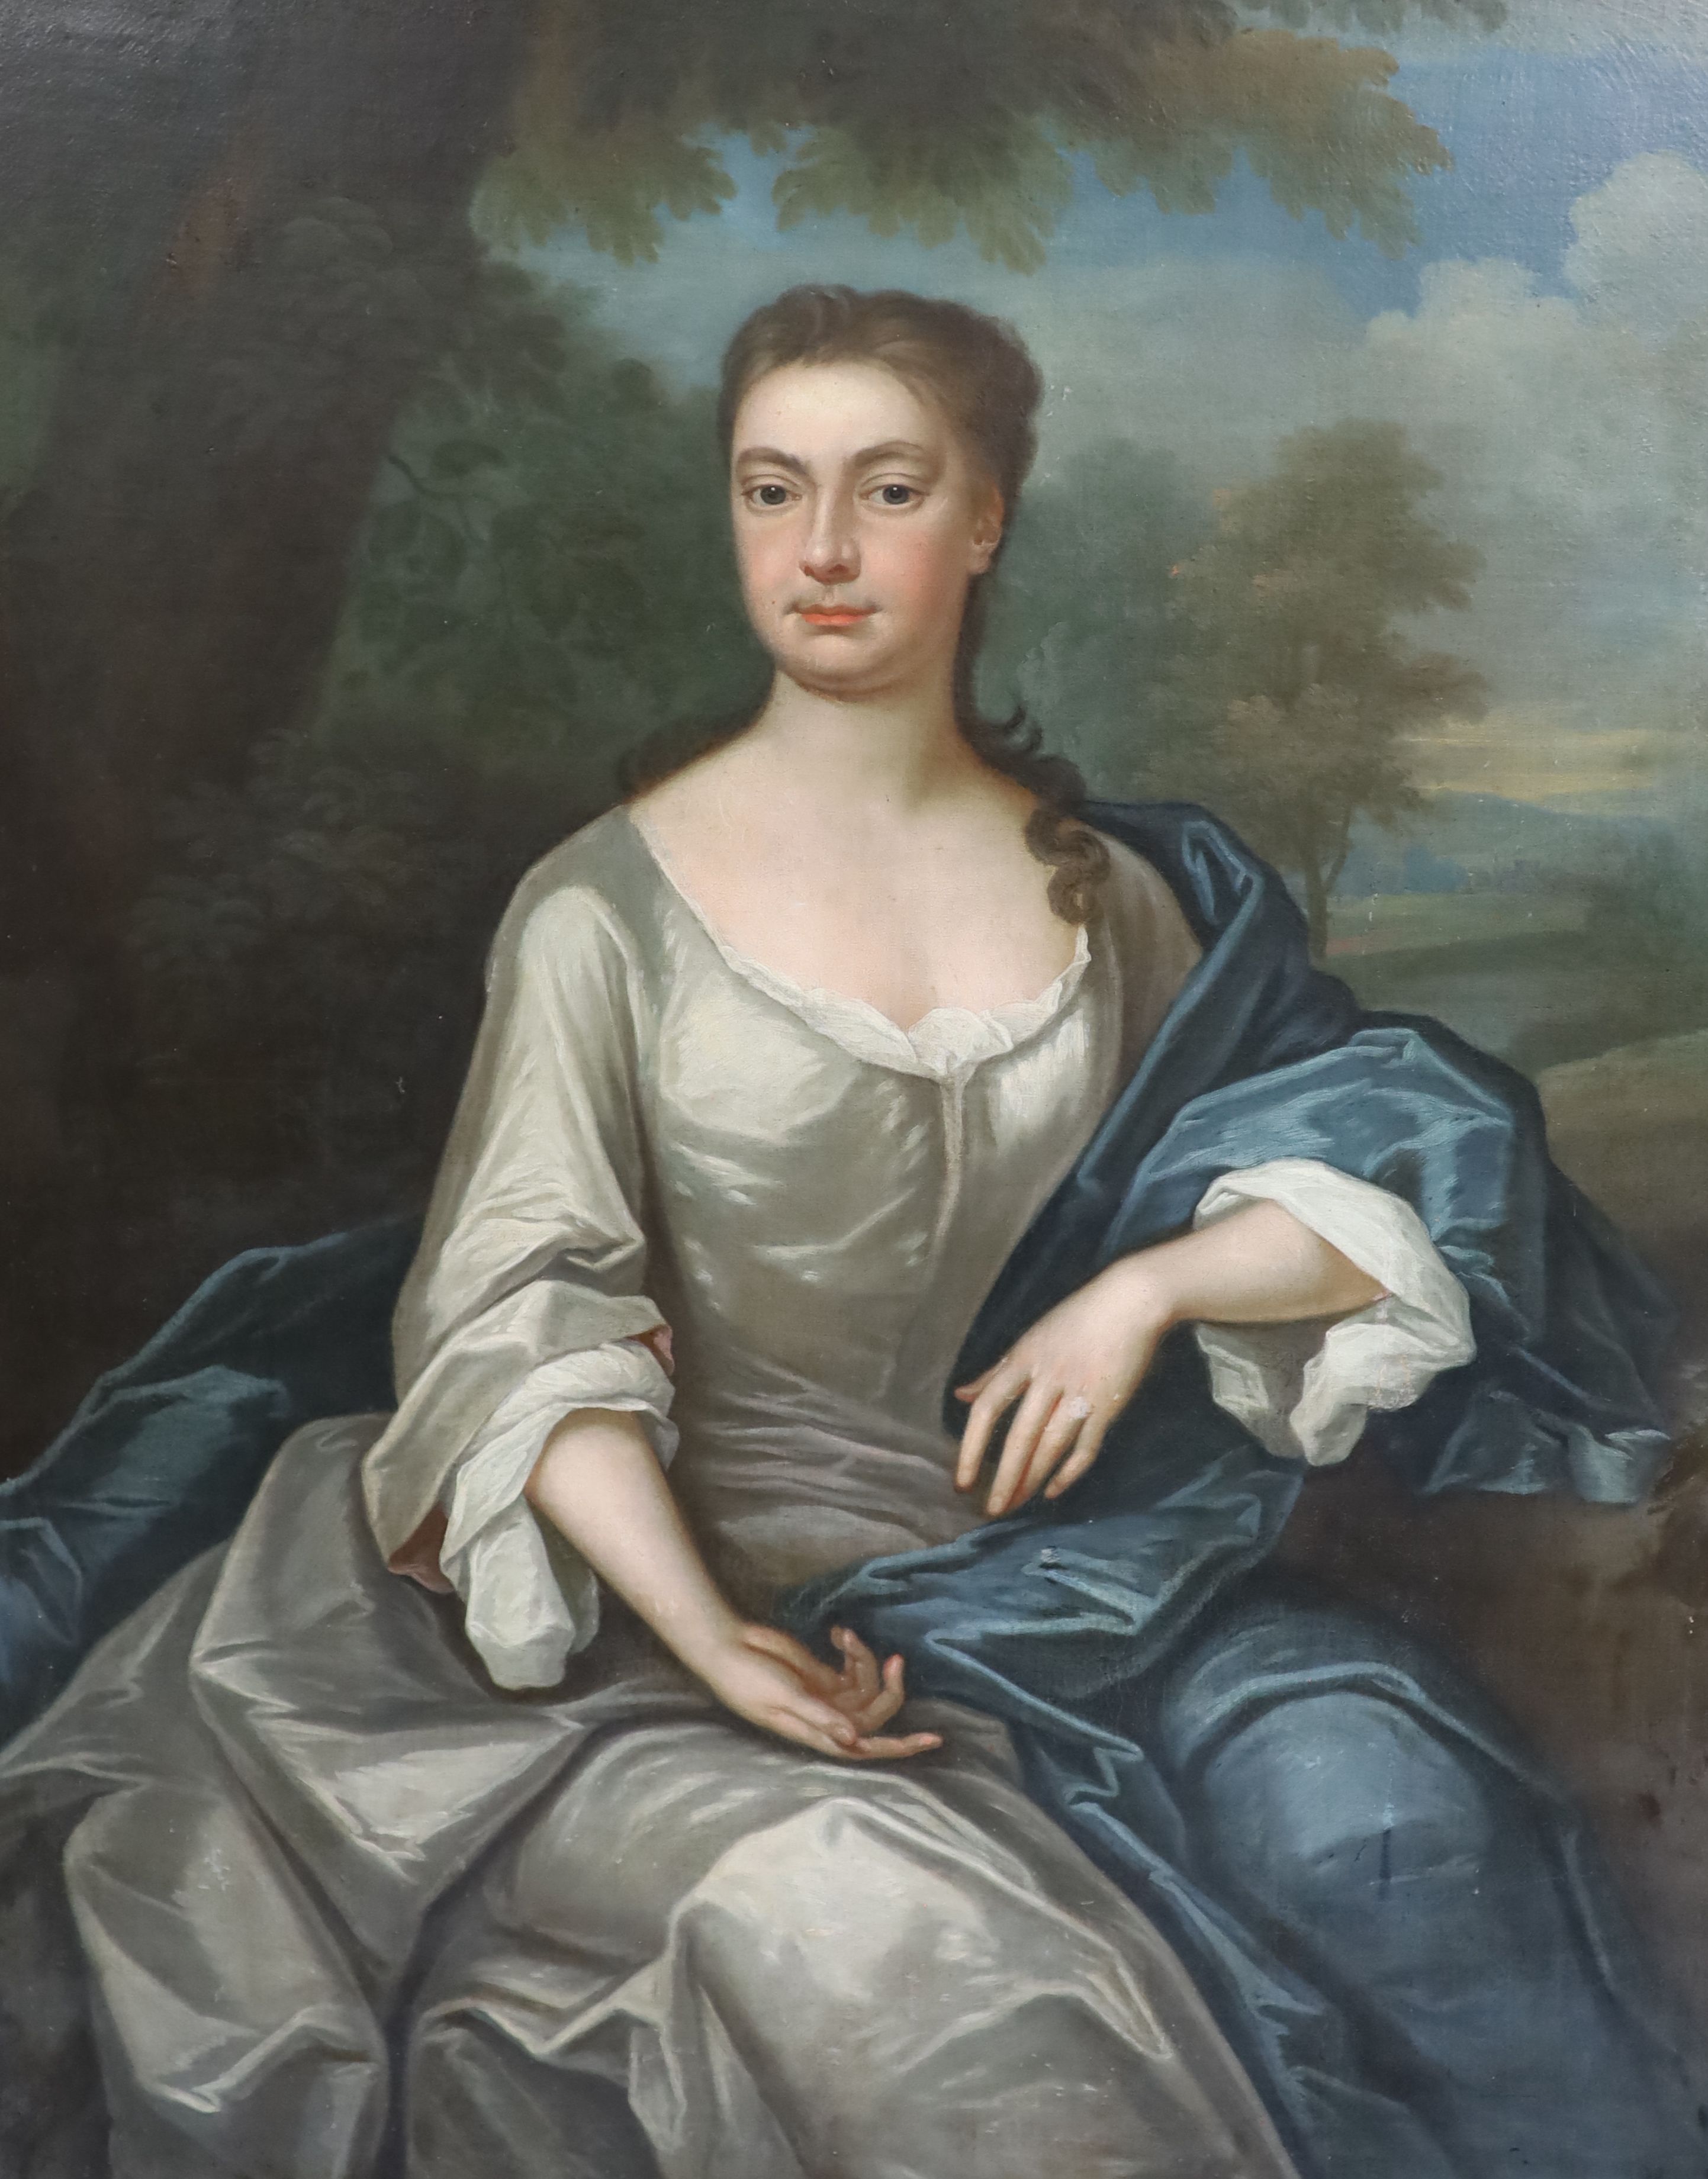 Circle of Sir Godfrey Kneller (1646-1723), Three quarter length portrait of a lady seated in a landscape, oil on canvas, 125 x 100cm